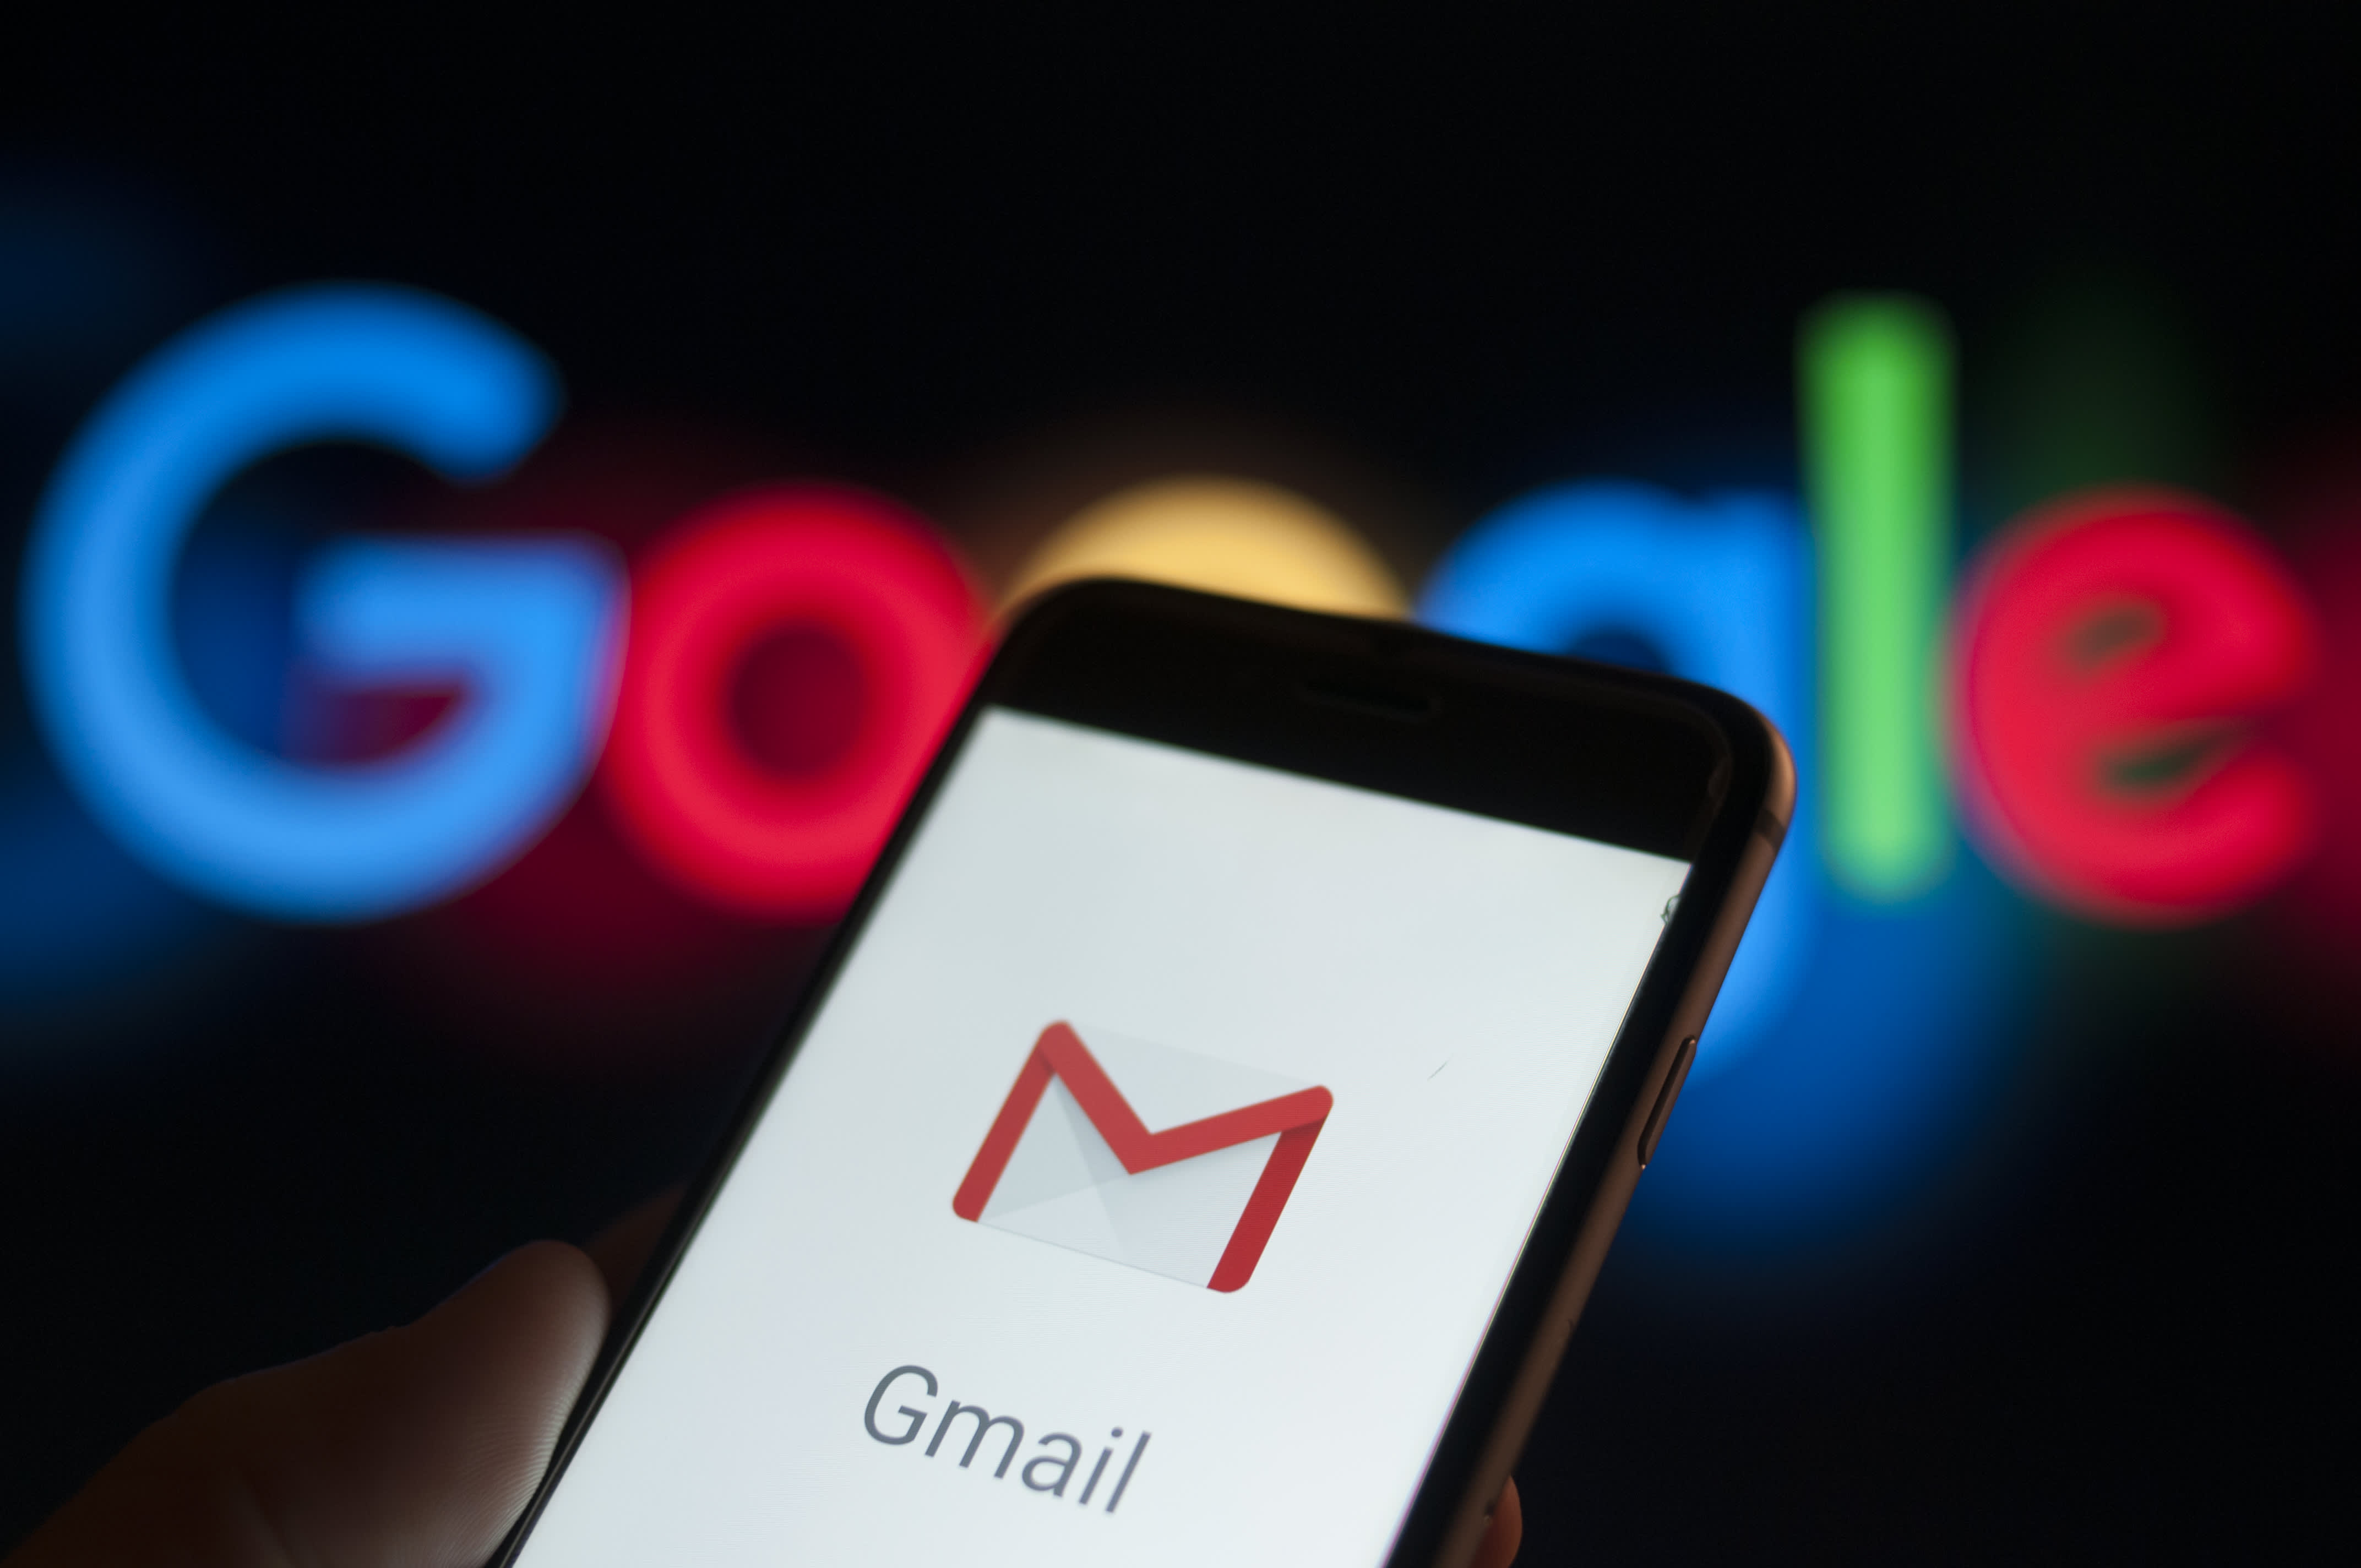 Gmail dominates consumer email with 1.5 billion users